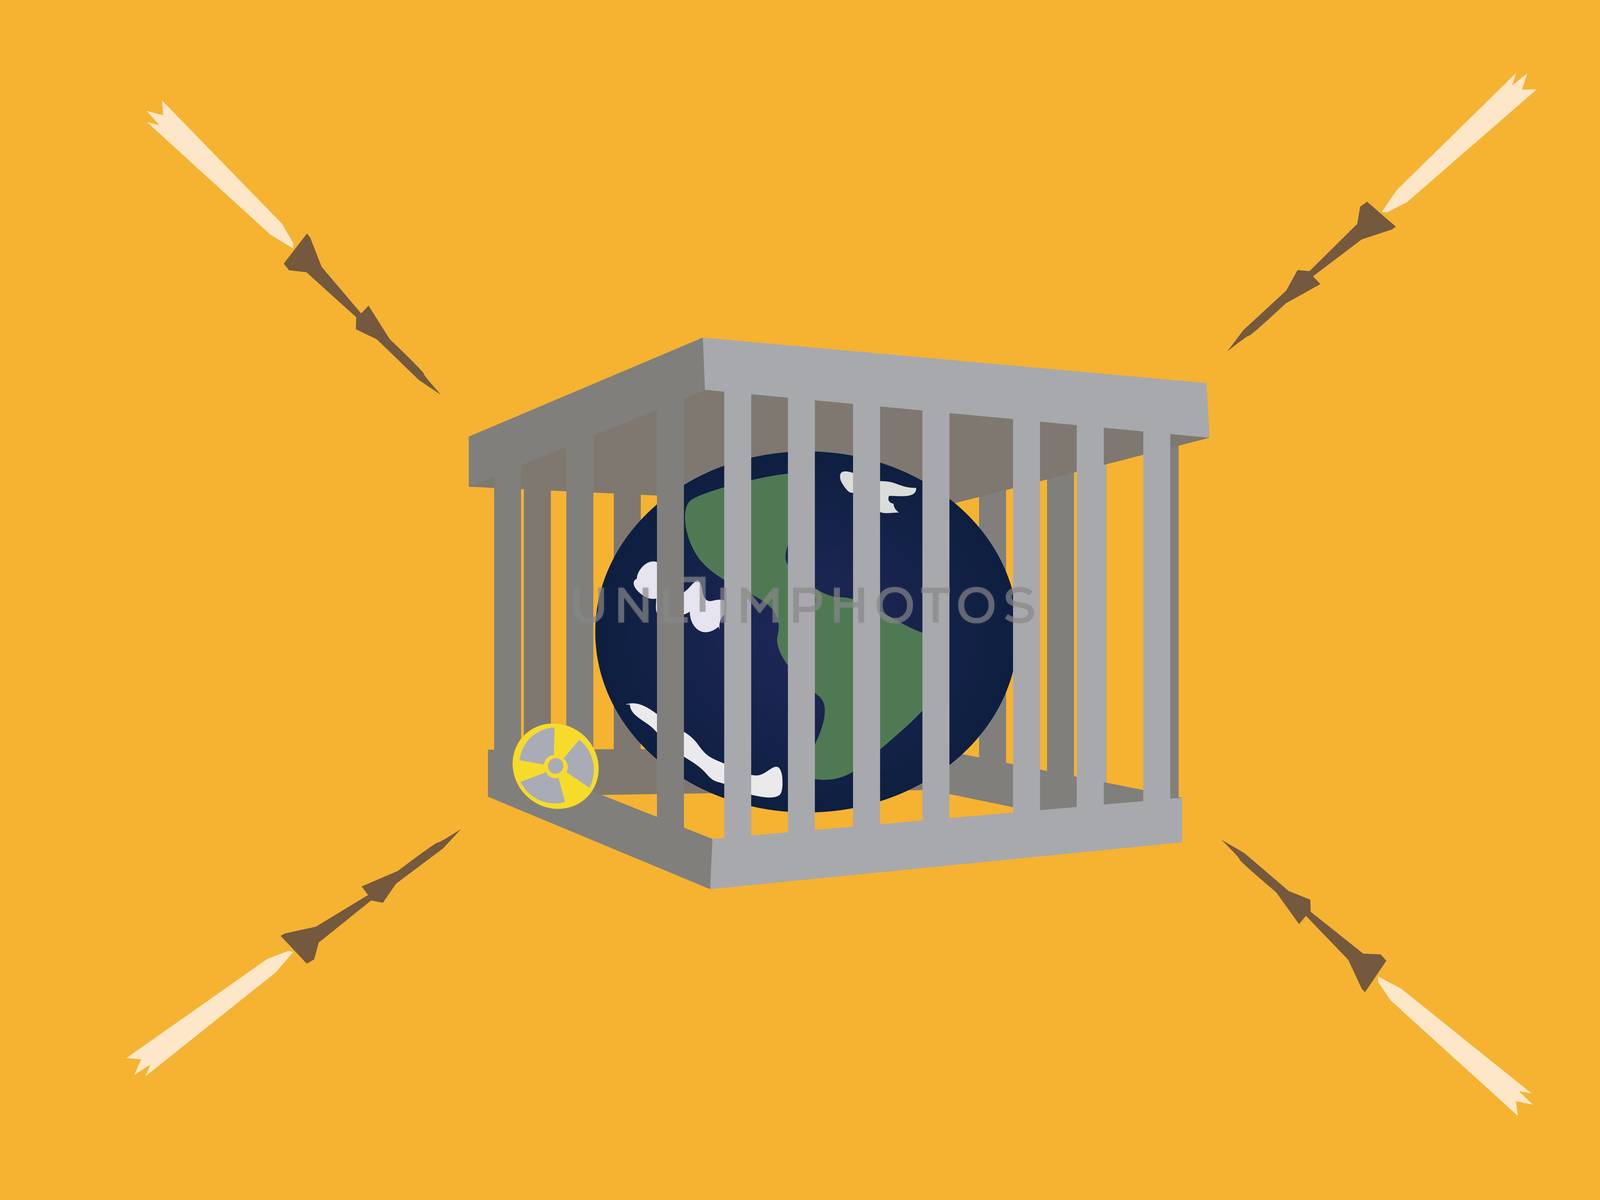 Missile Bomb Earth In Jail by olovedog